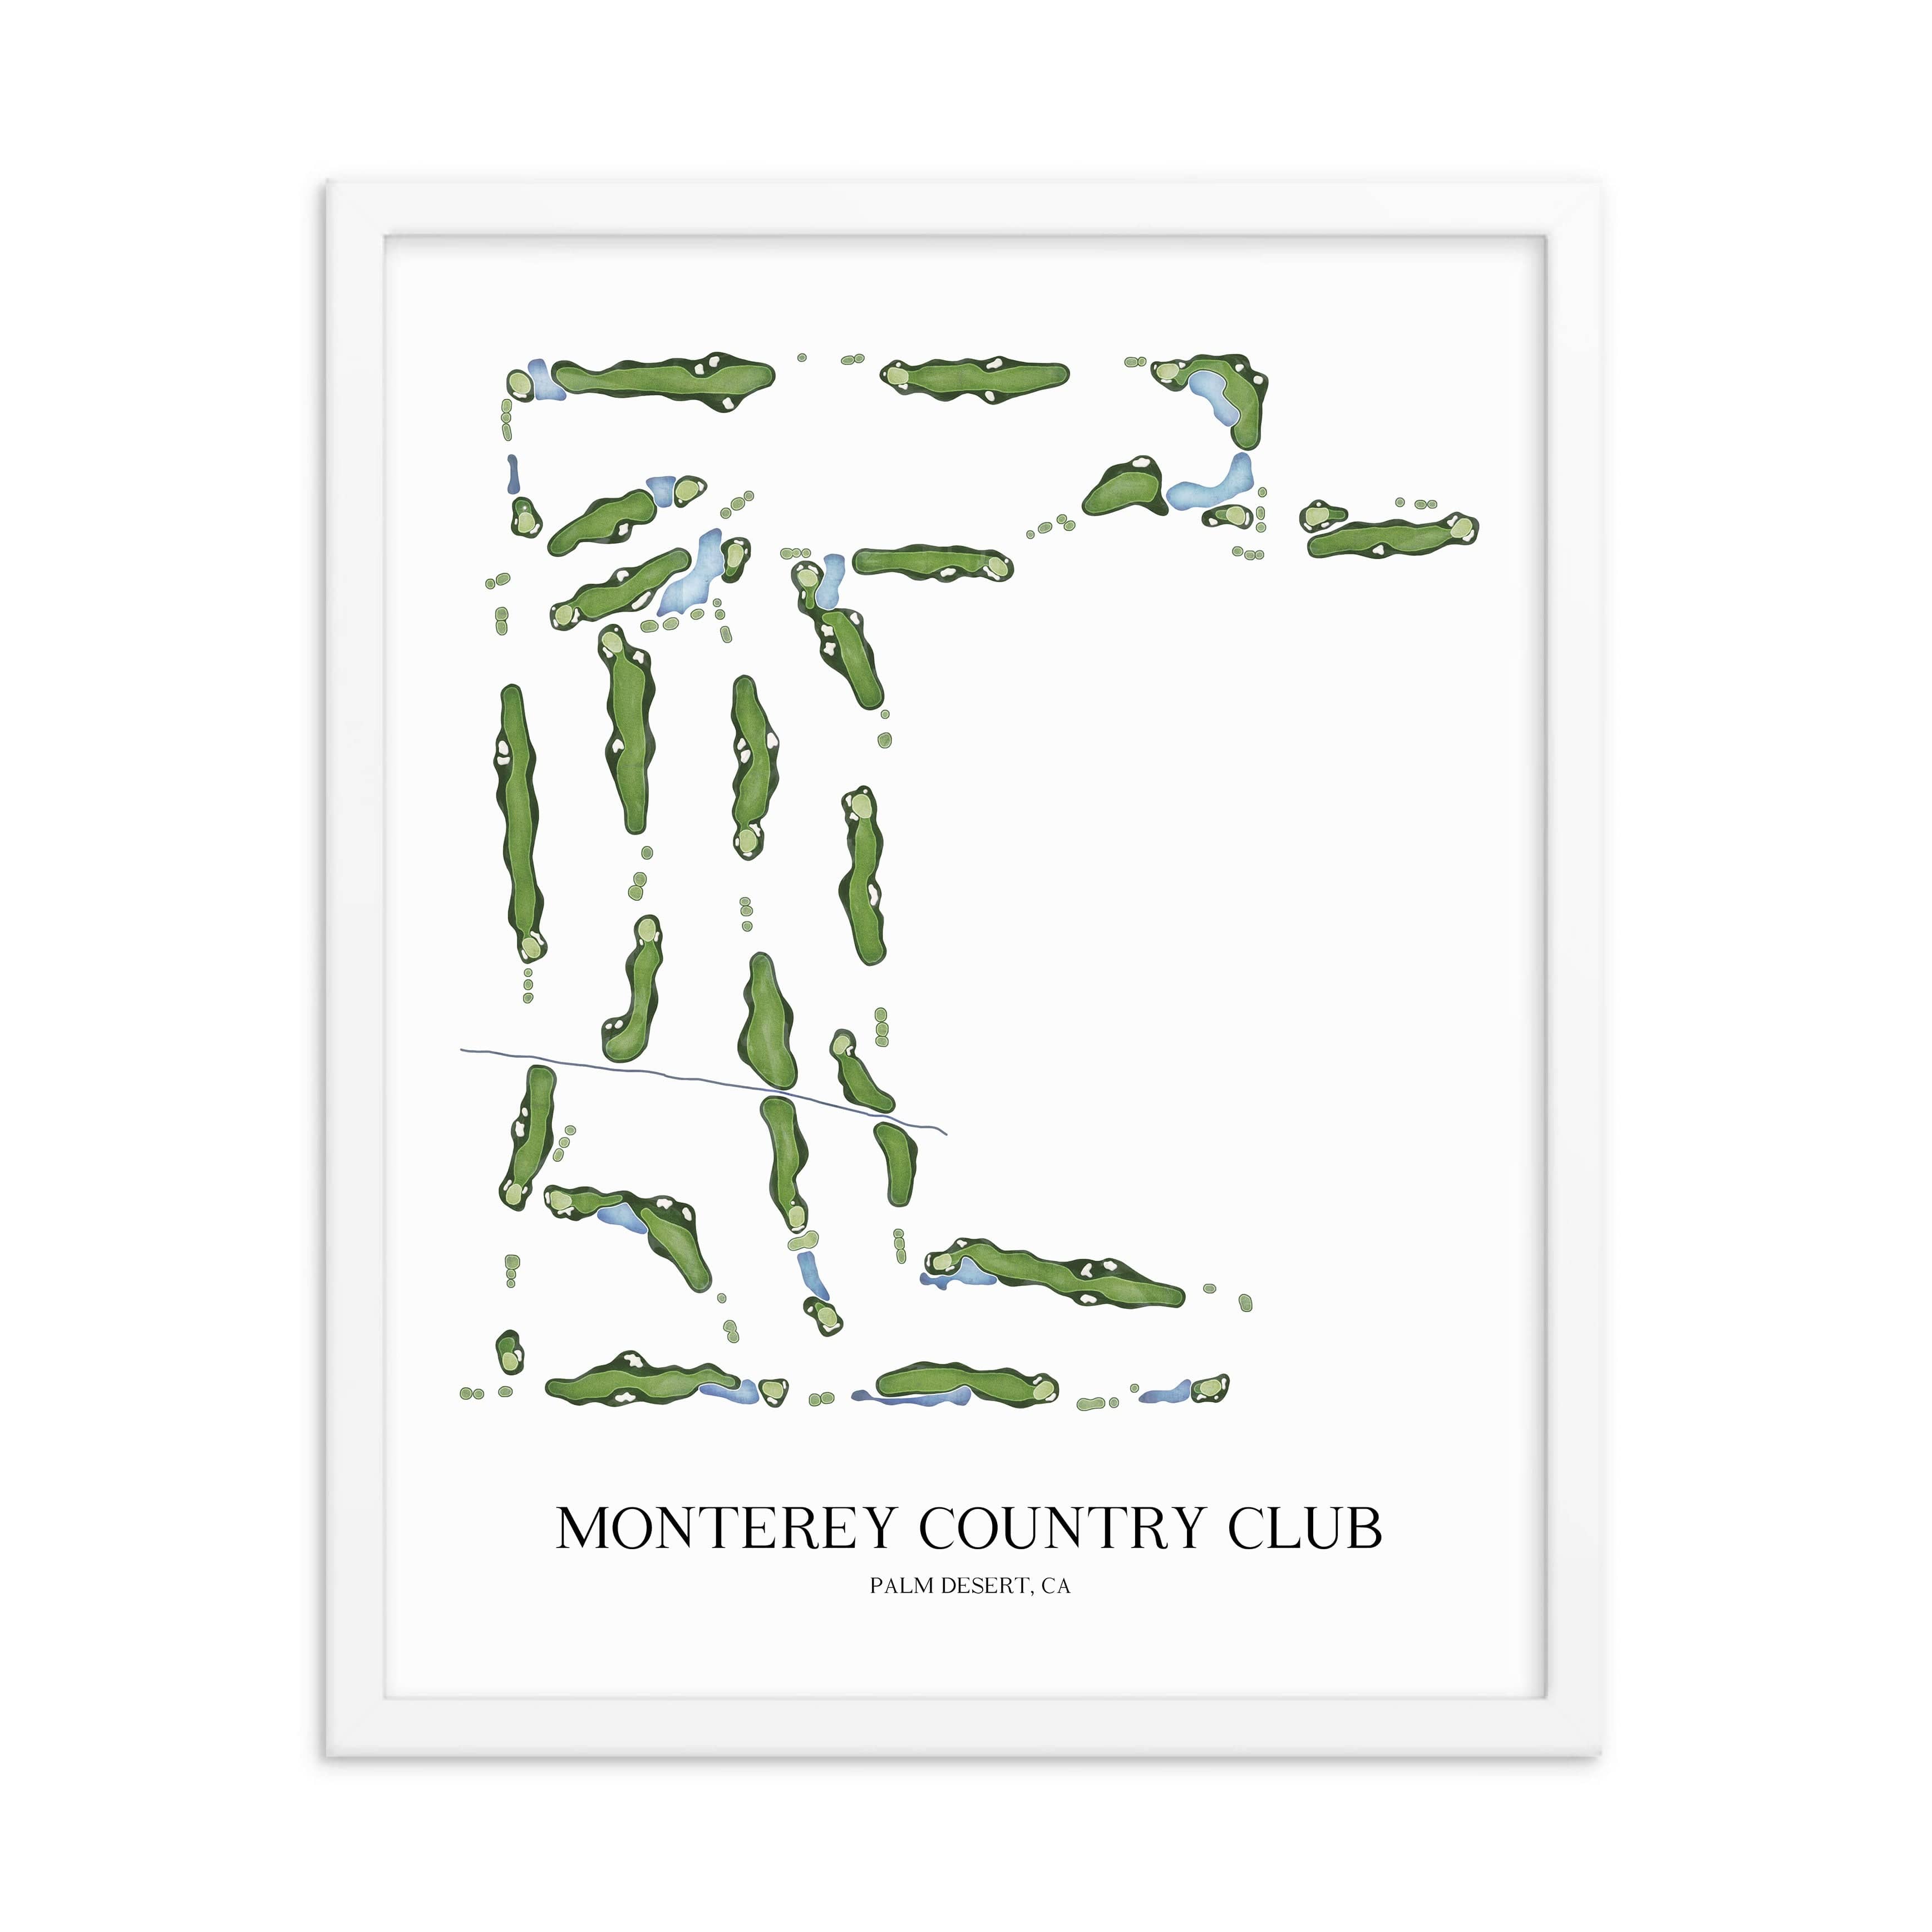 The 19th Hole Golf Shop - Golf Course Prints -  Monterey Country Club Golf Course Map